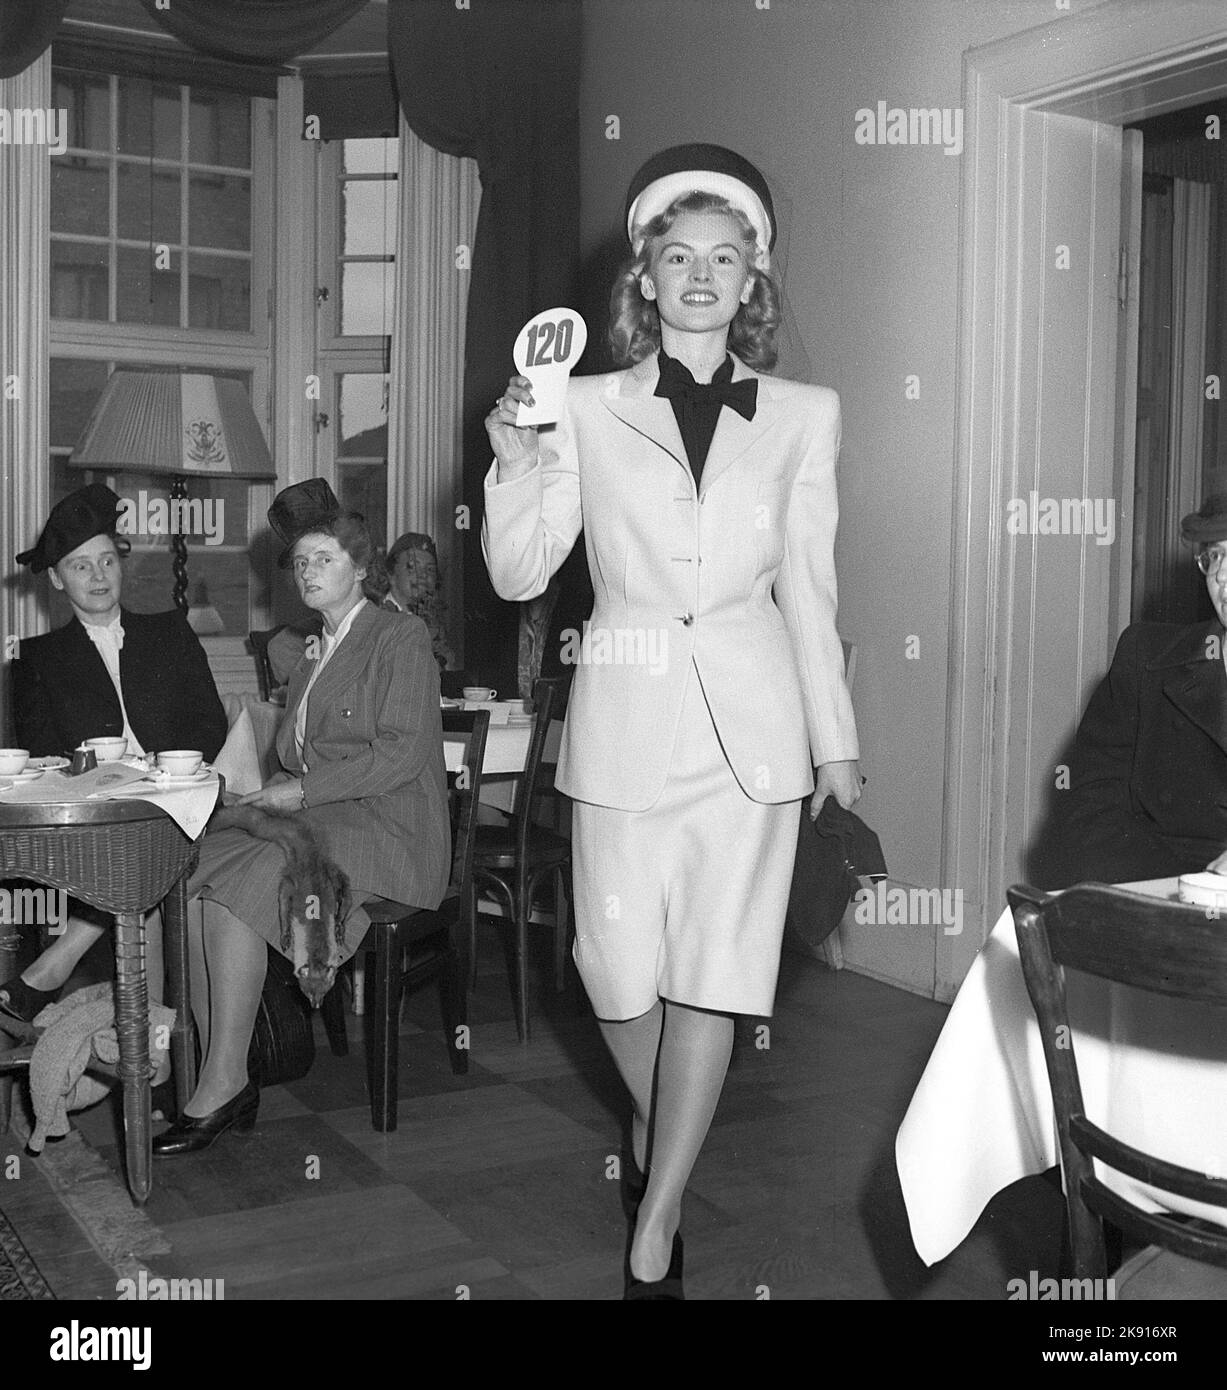 Women's fashion in the 1940s. A young woman in a 1946 outfit. A skirt with the right length, jacket, matching hat. The fashion show of ladies fashion of this year goes on in front of people in an audience. Sweden 1946  Kristoffersson T148-4 Stock Photo